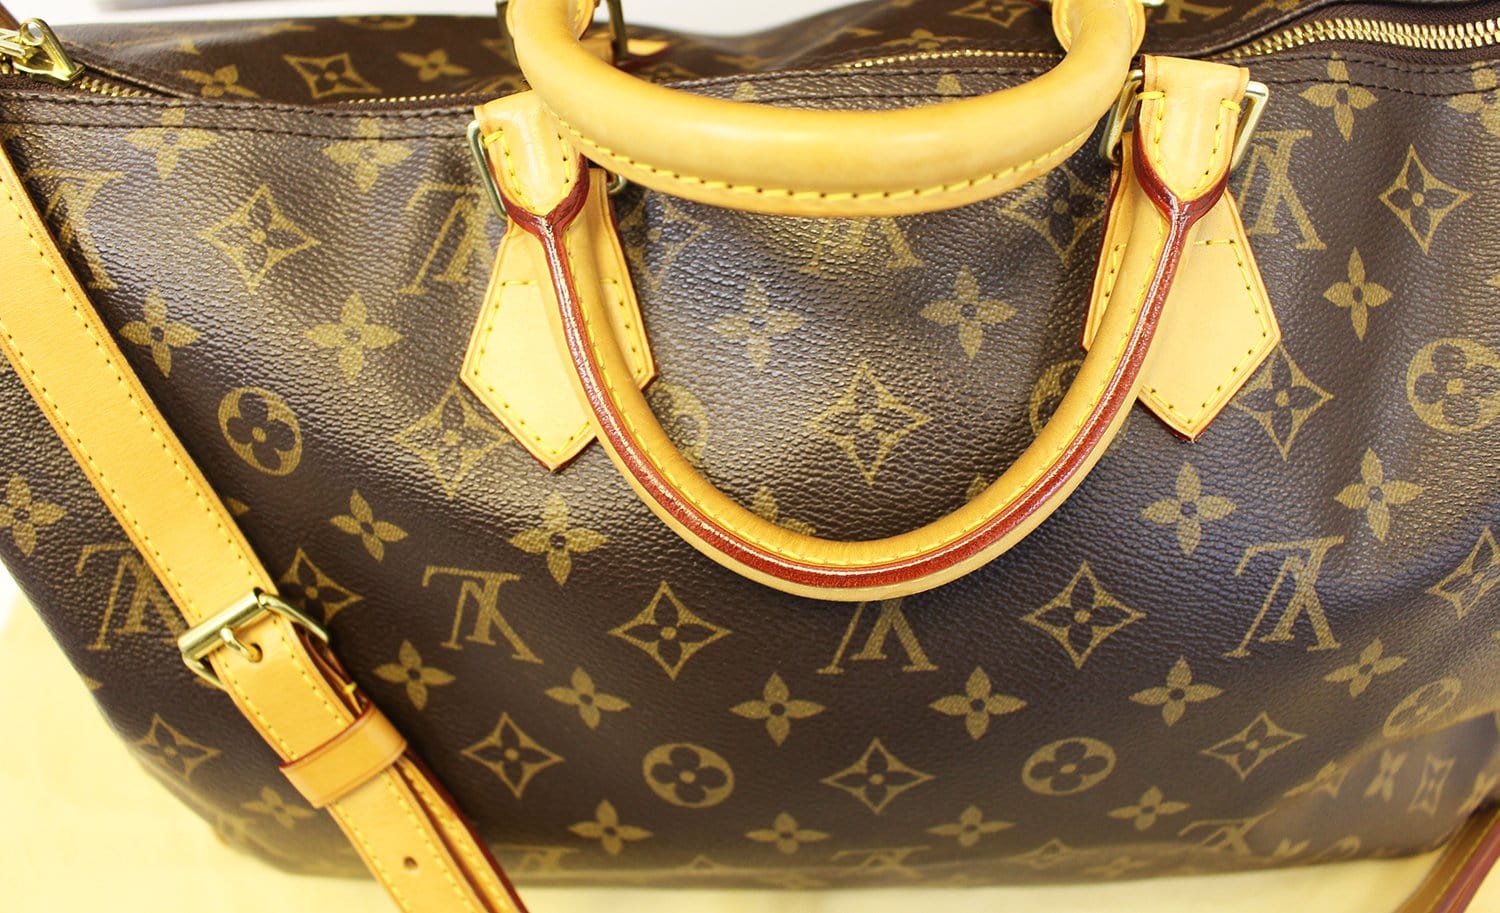 Louis Vuitton Speedy Bandouliere Monogram Shadow (Without Accessories) 40  Black in Coated Canvas with Brass - US